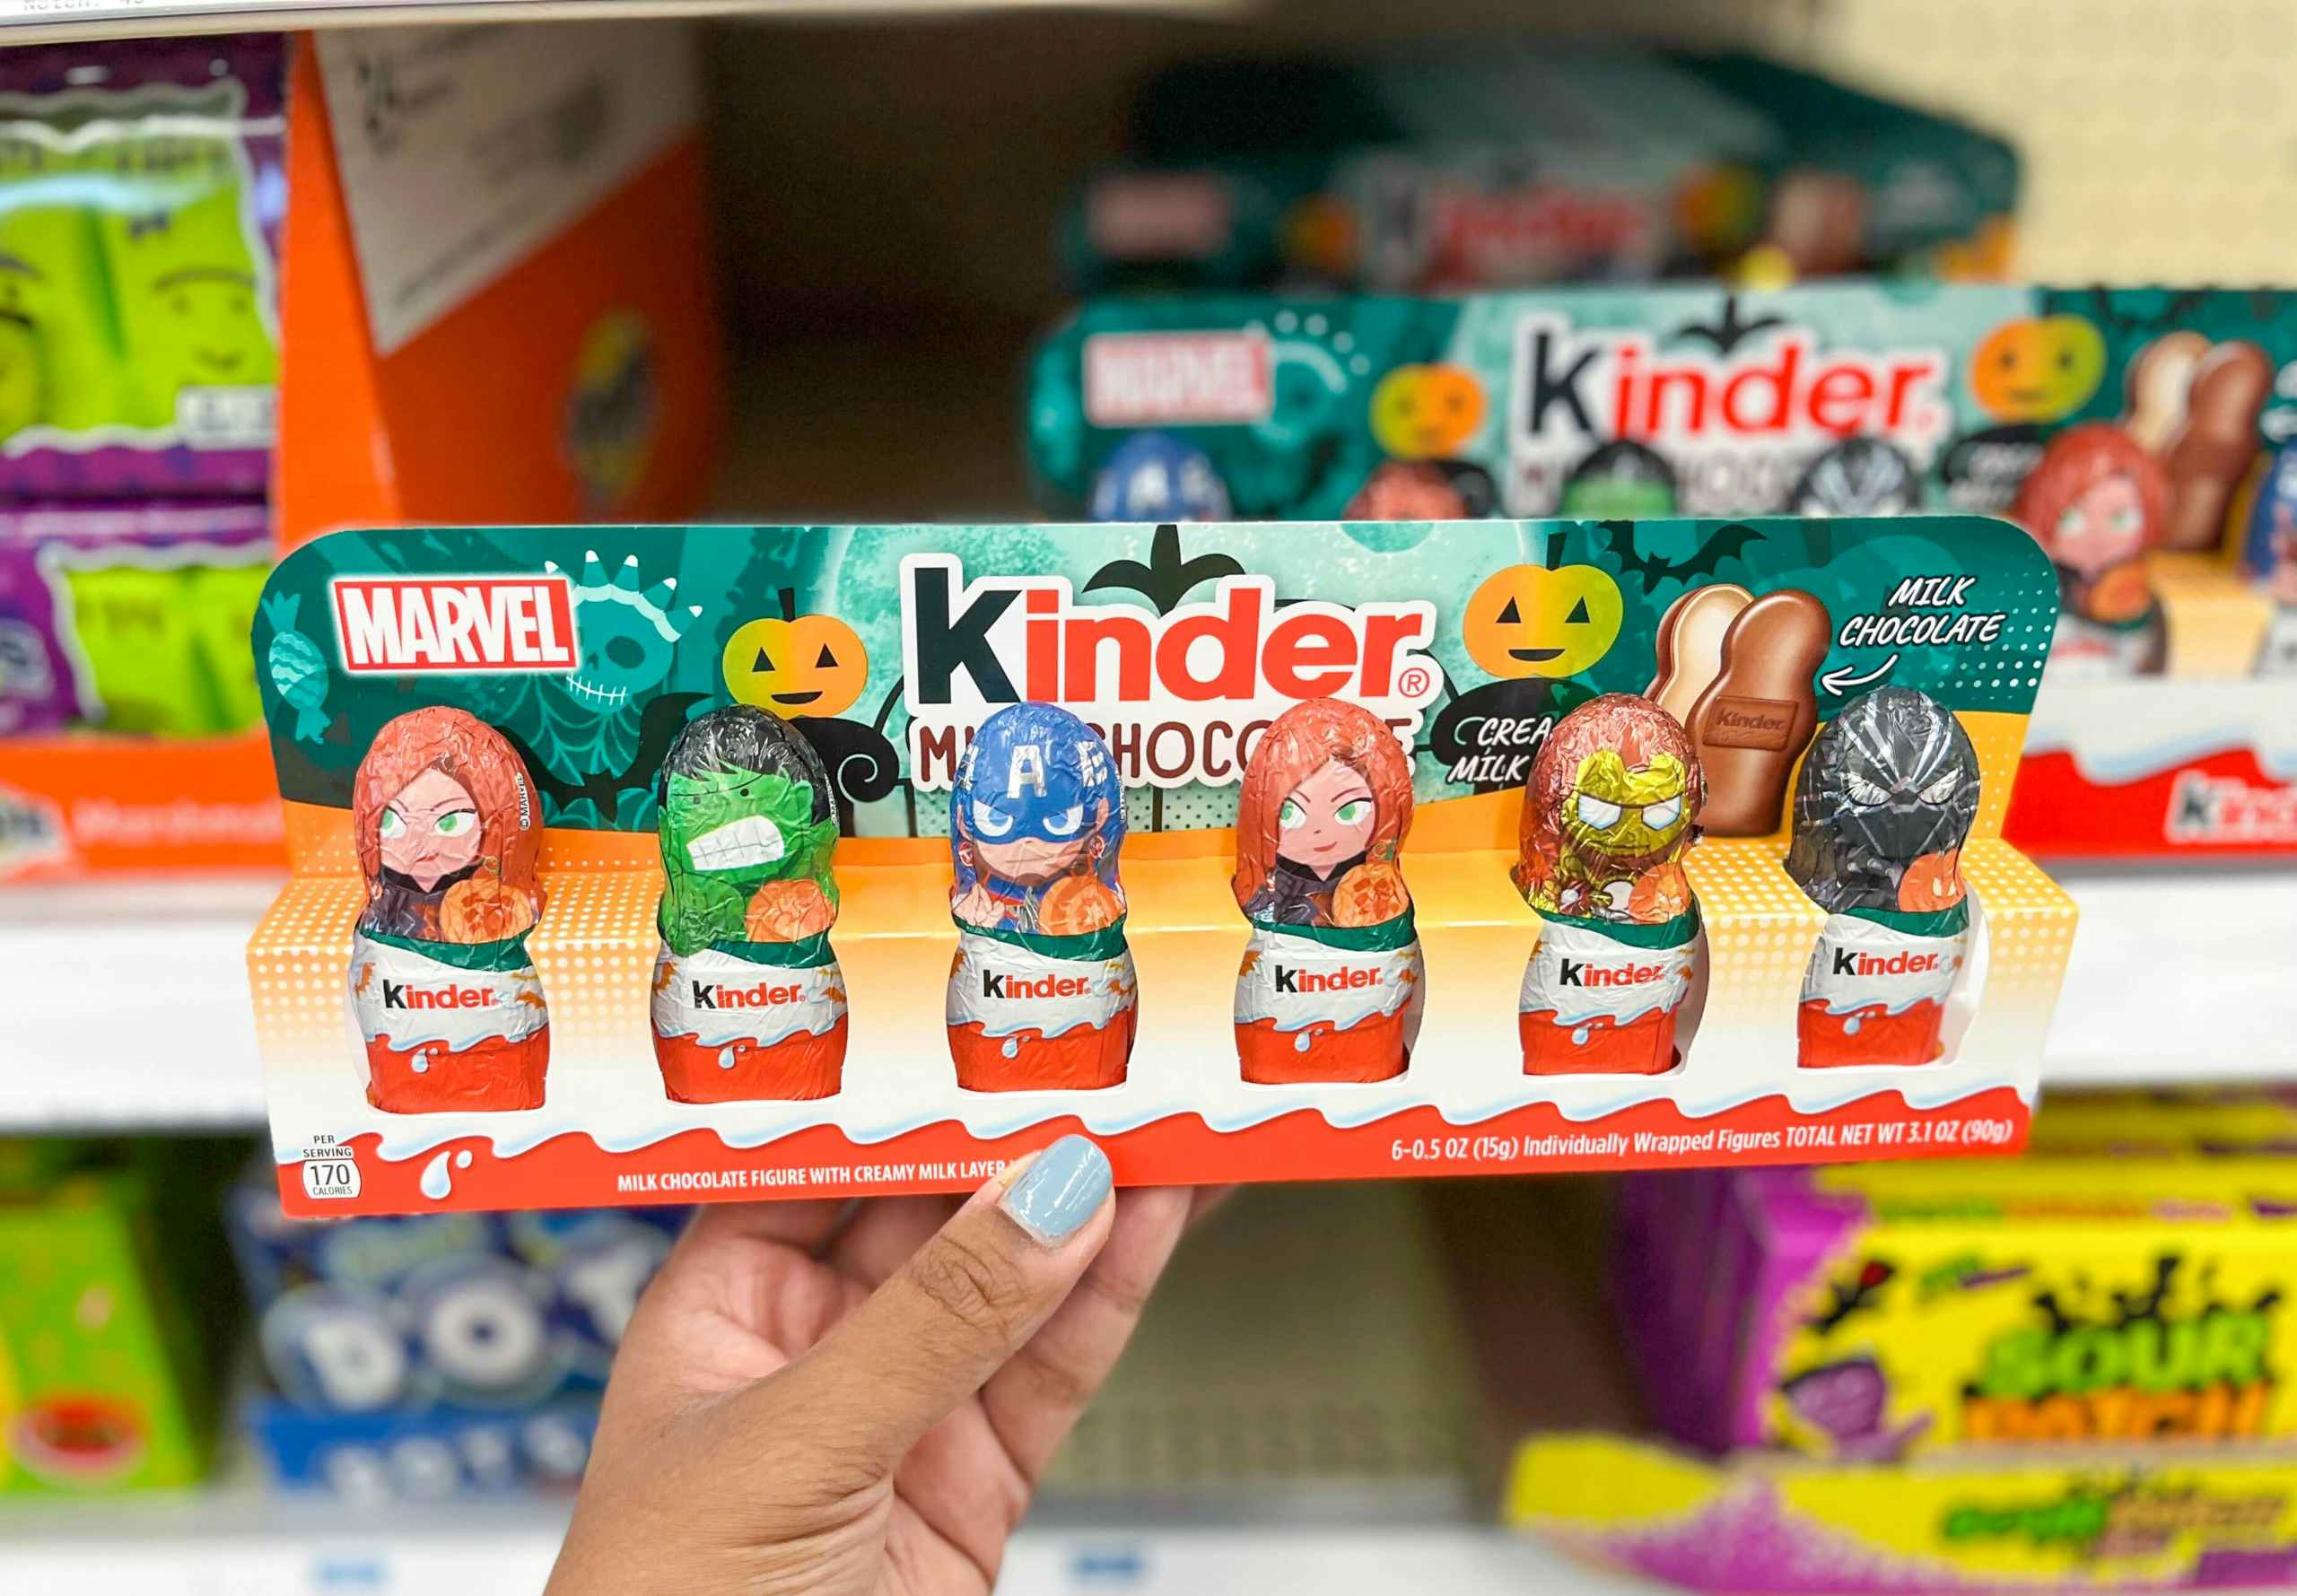 hand holding pack of Marvel Avengers Kinder milk chocolates in aisle